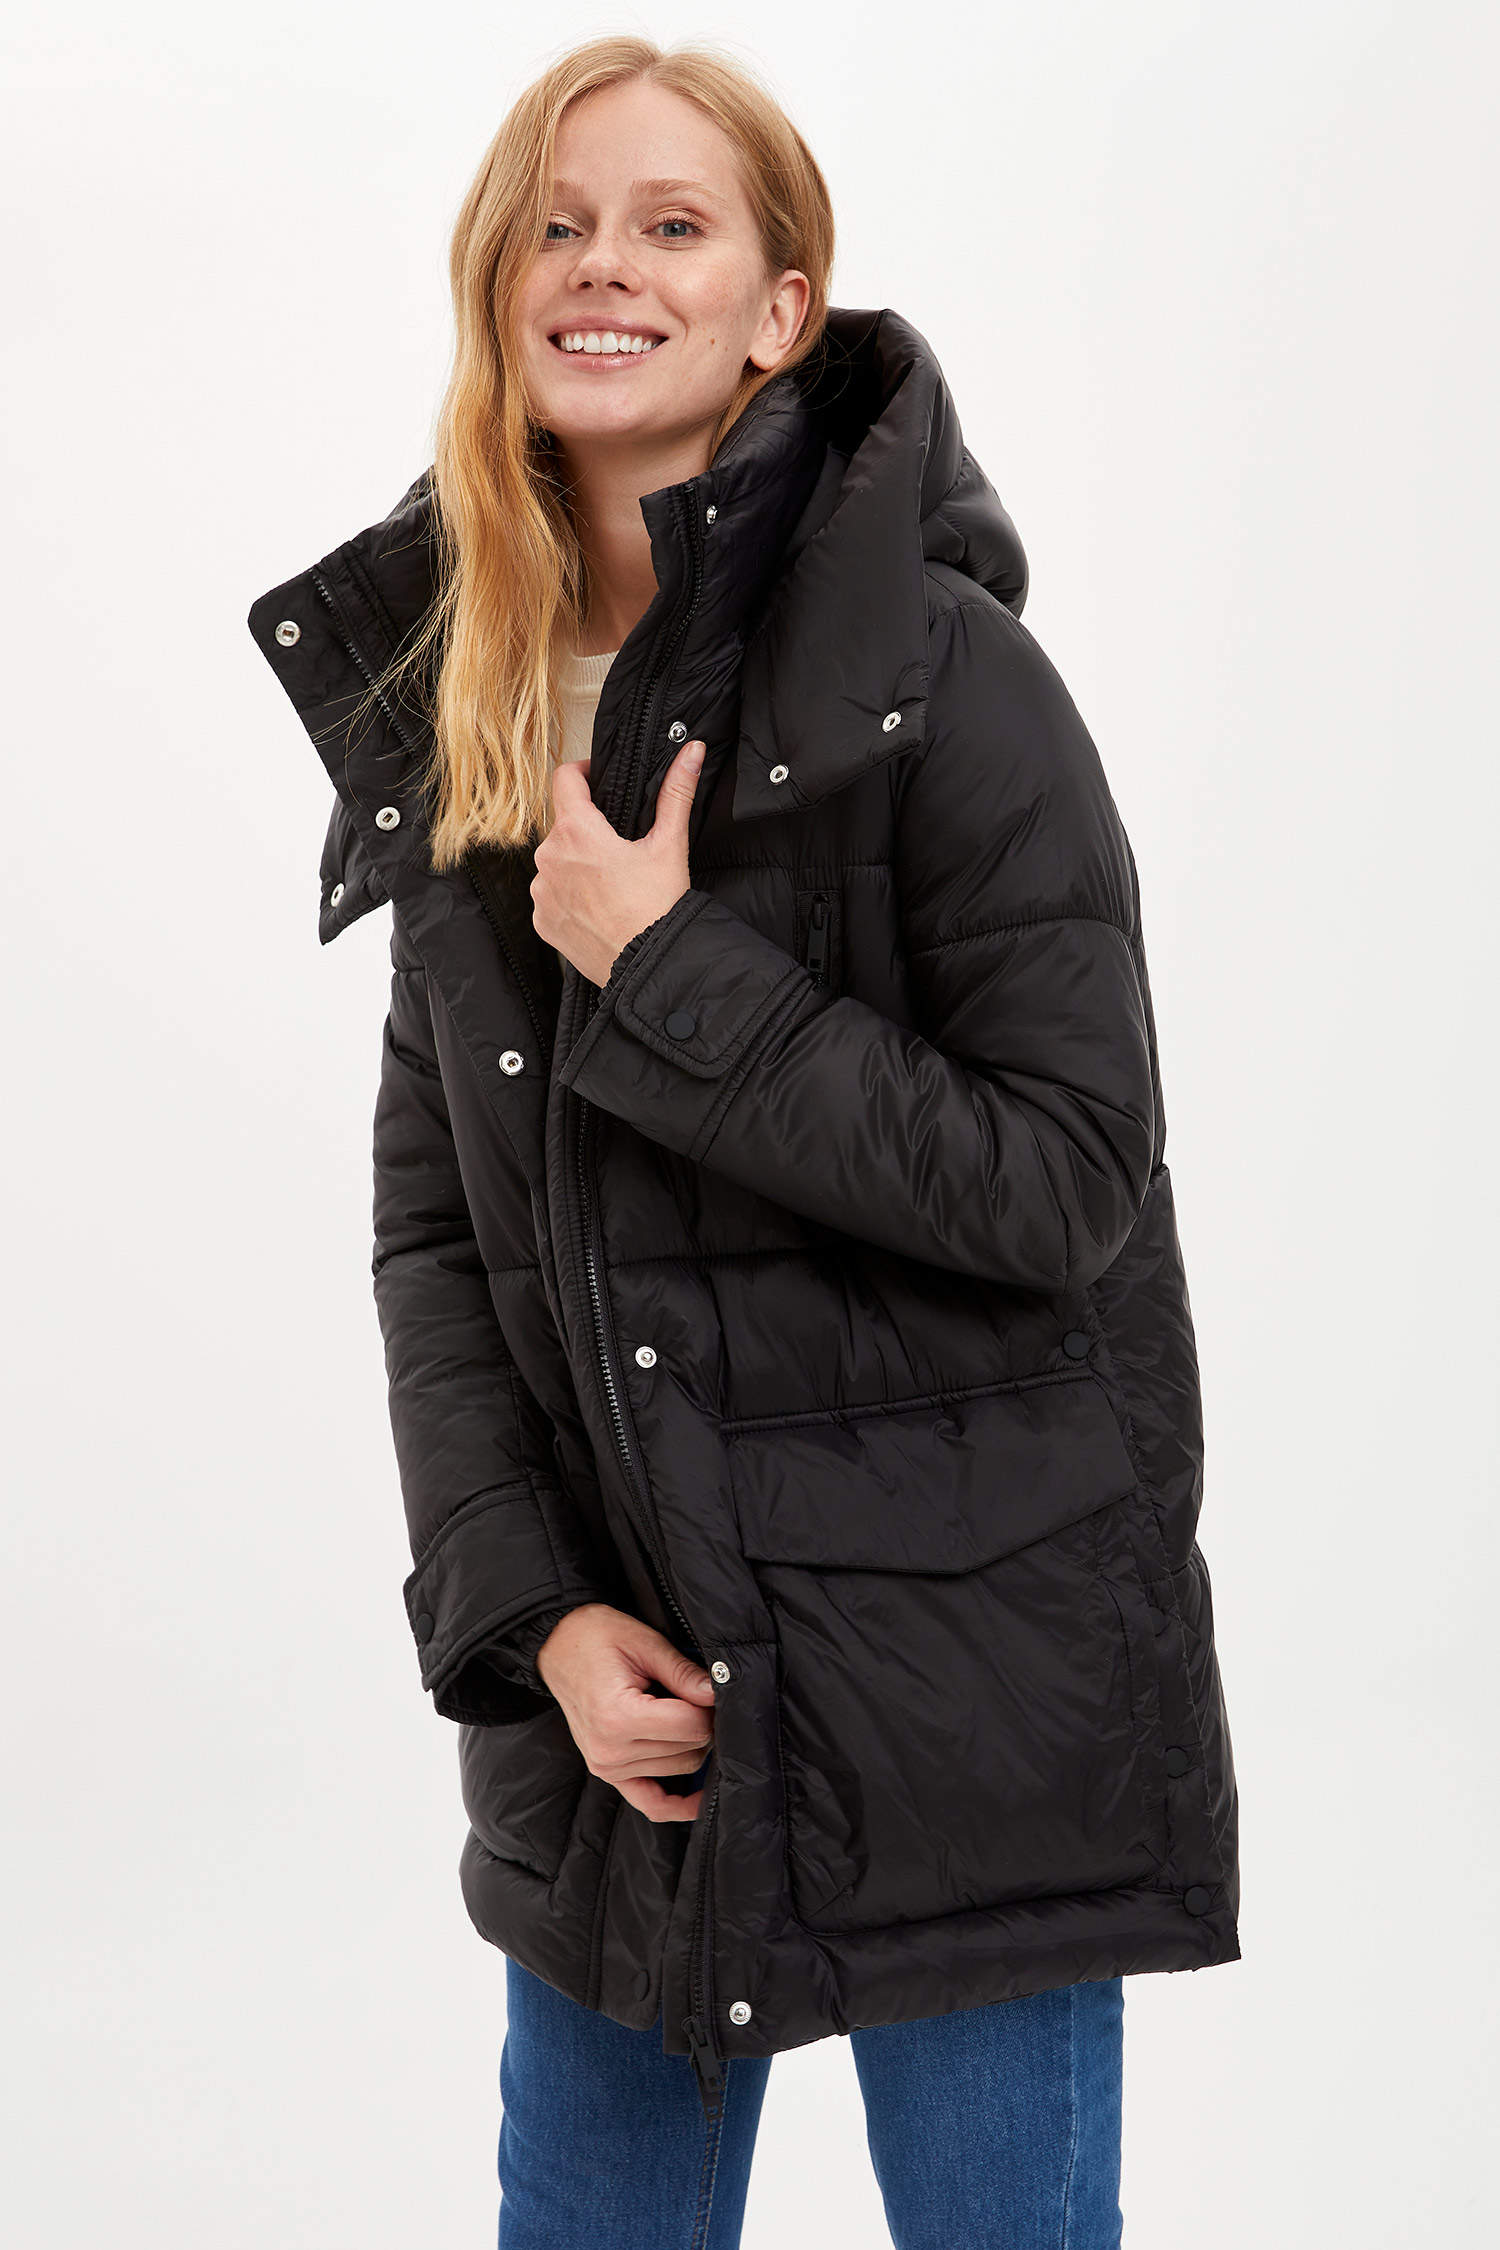 Black WOMAN Oversize Hooded Parka With Zippers 1513552 | DeFacto